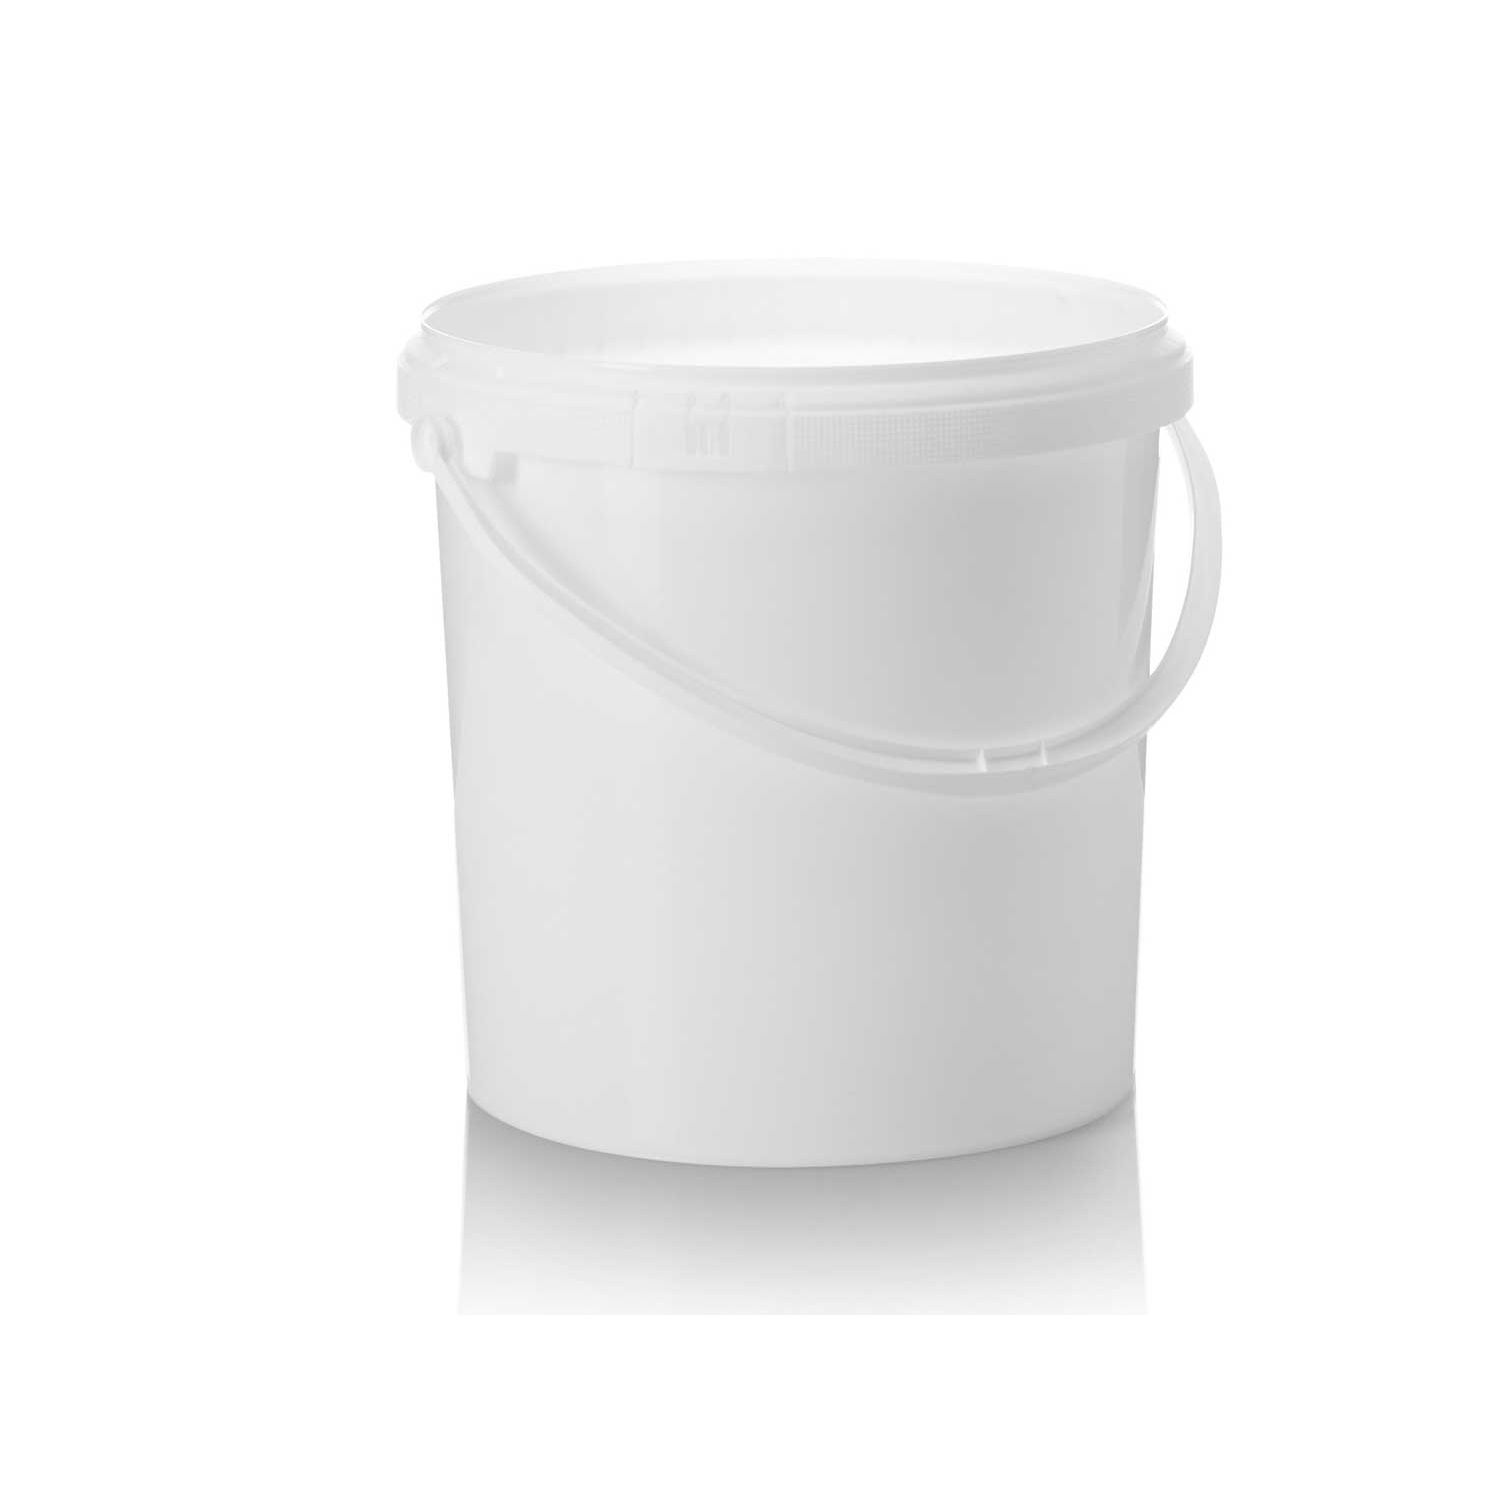 10ltr White PP Tamper Evident Tall Pail with Plastic Handle